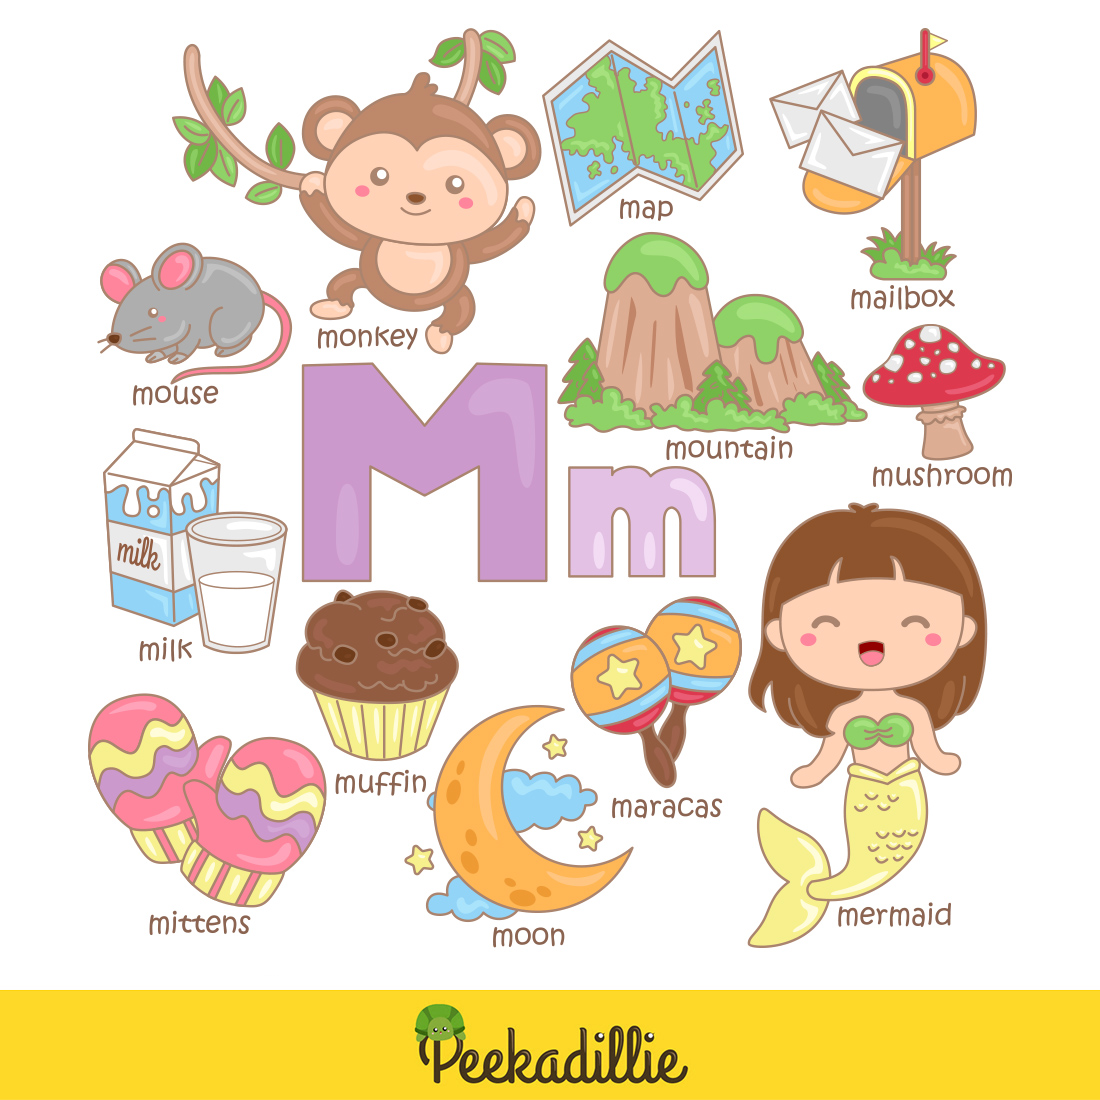 Alphabet M For Vocabulary School Letter Reading Writing Font Study Learning Student Toodler Kids Cartoon Mouse Monkey Mermaid Mountain Milk Mushroom Mittens Mailbox Moon Maracas Muffin Map Illustration Vector Clipart preview image.